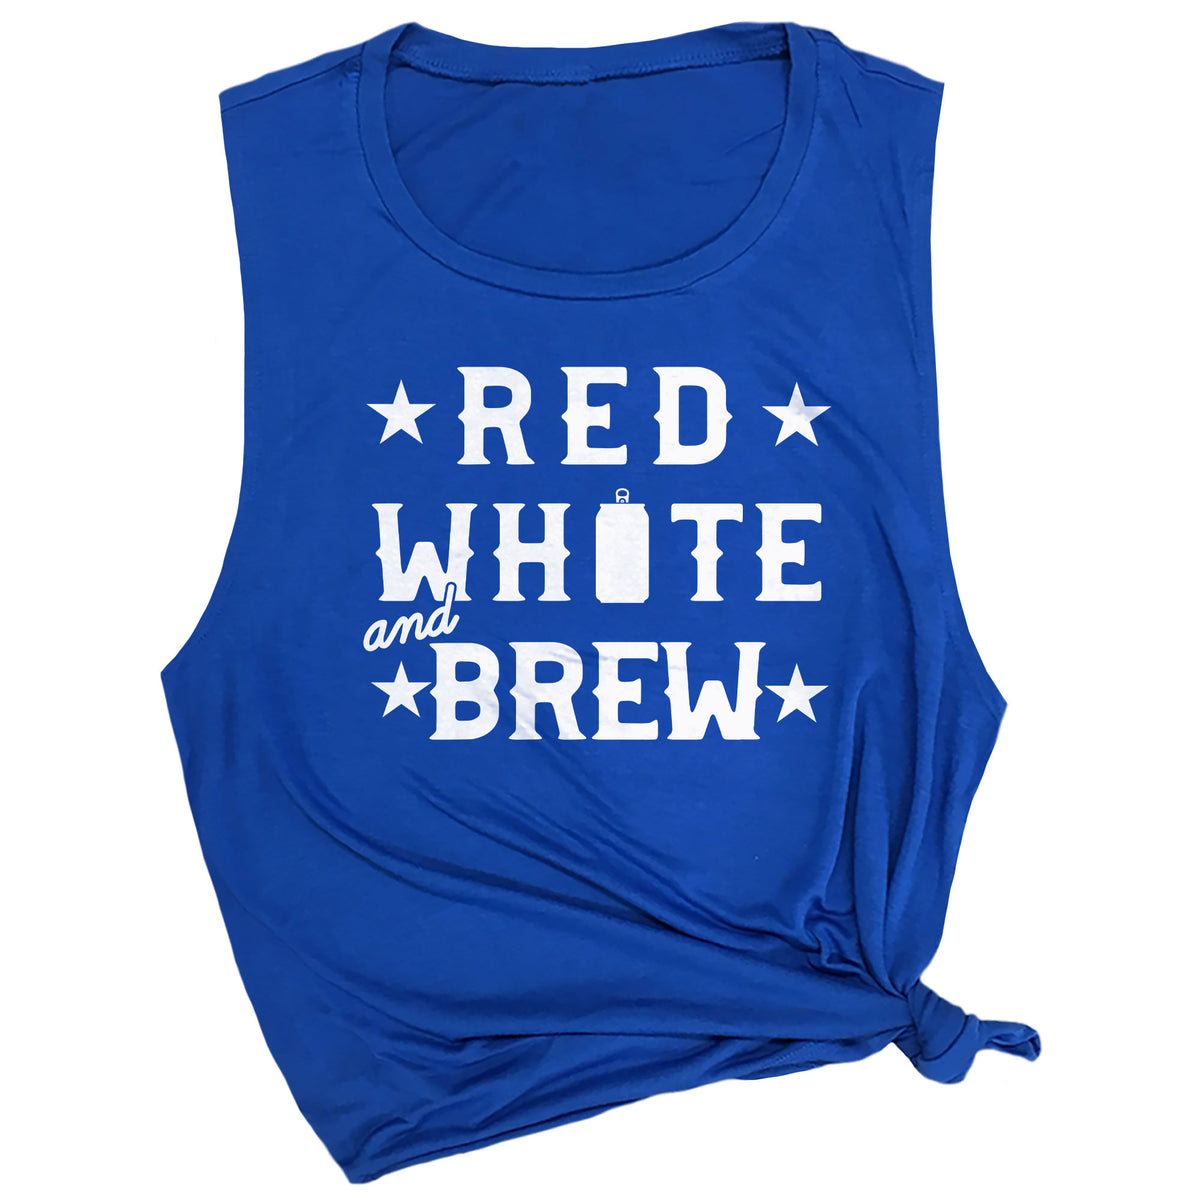 Red, White and Brew Muscle Tee